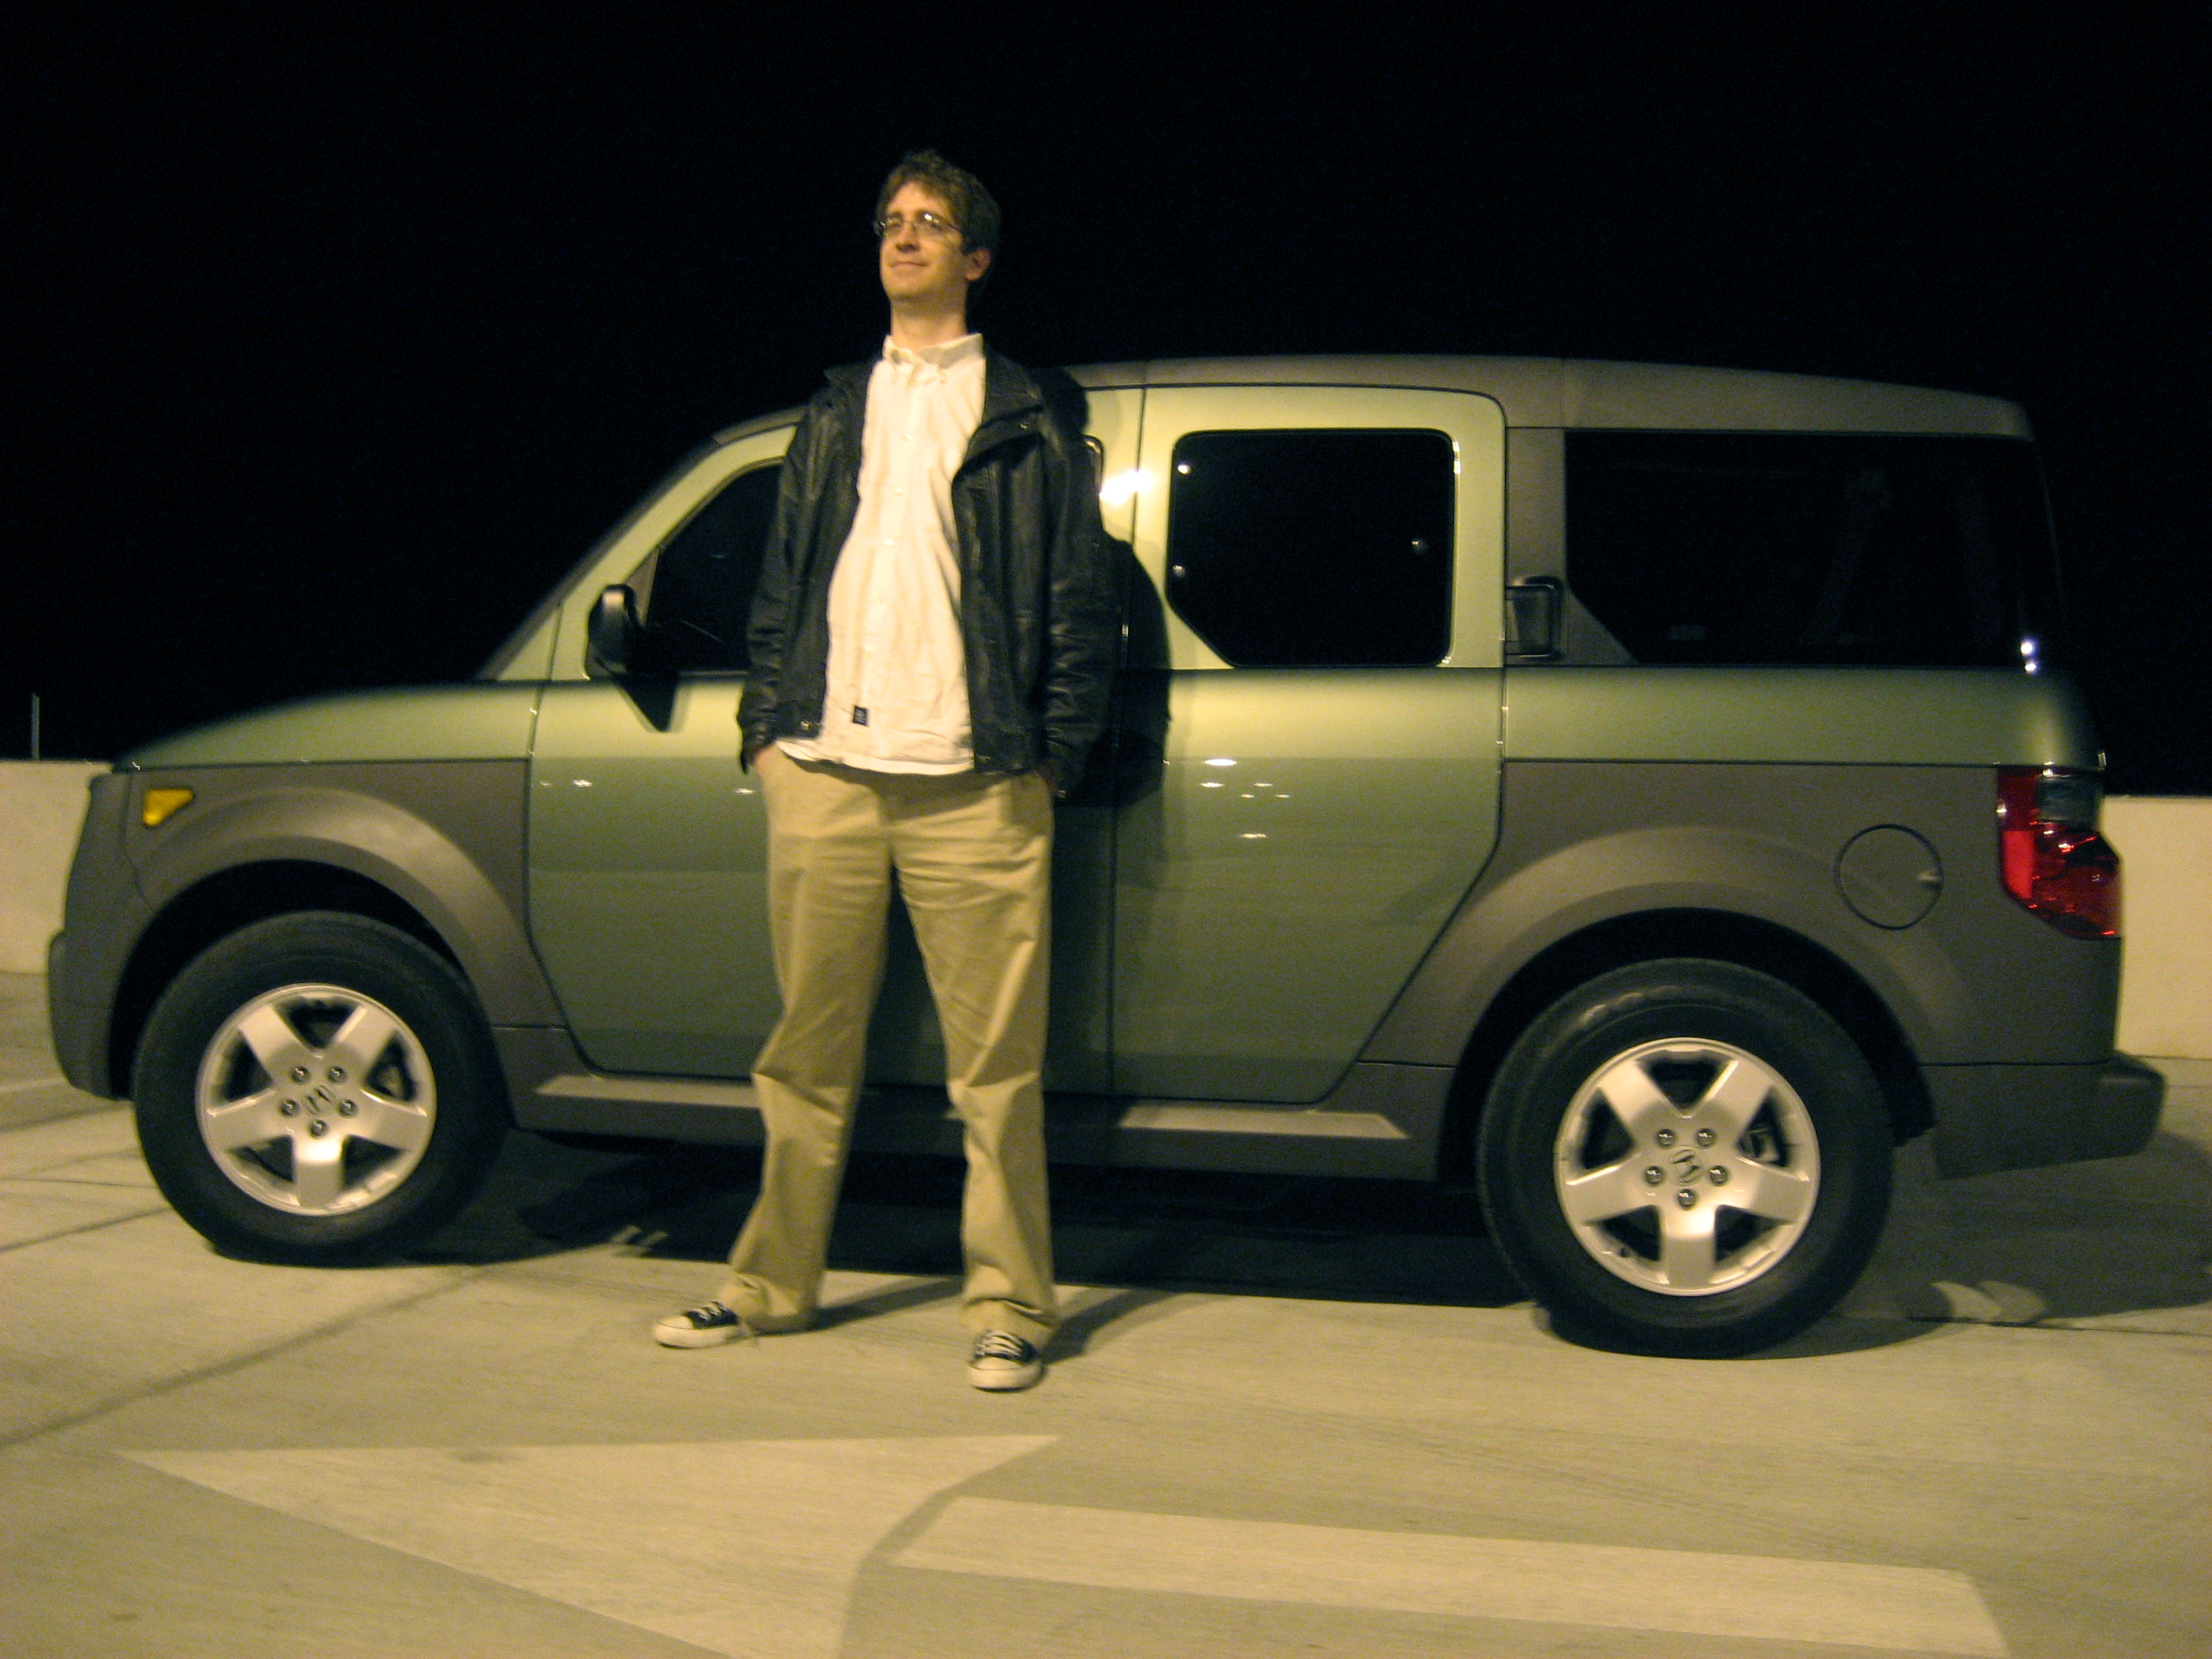 Christopher with a new Honda Element